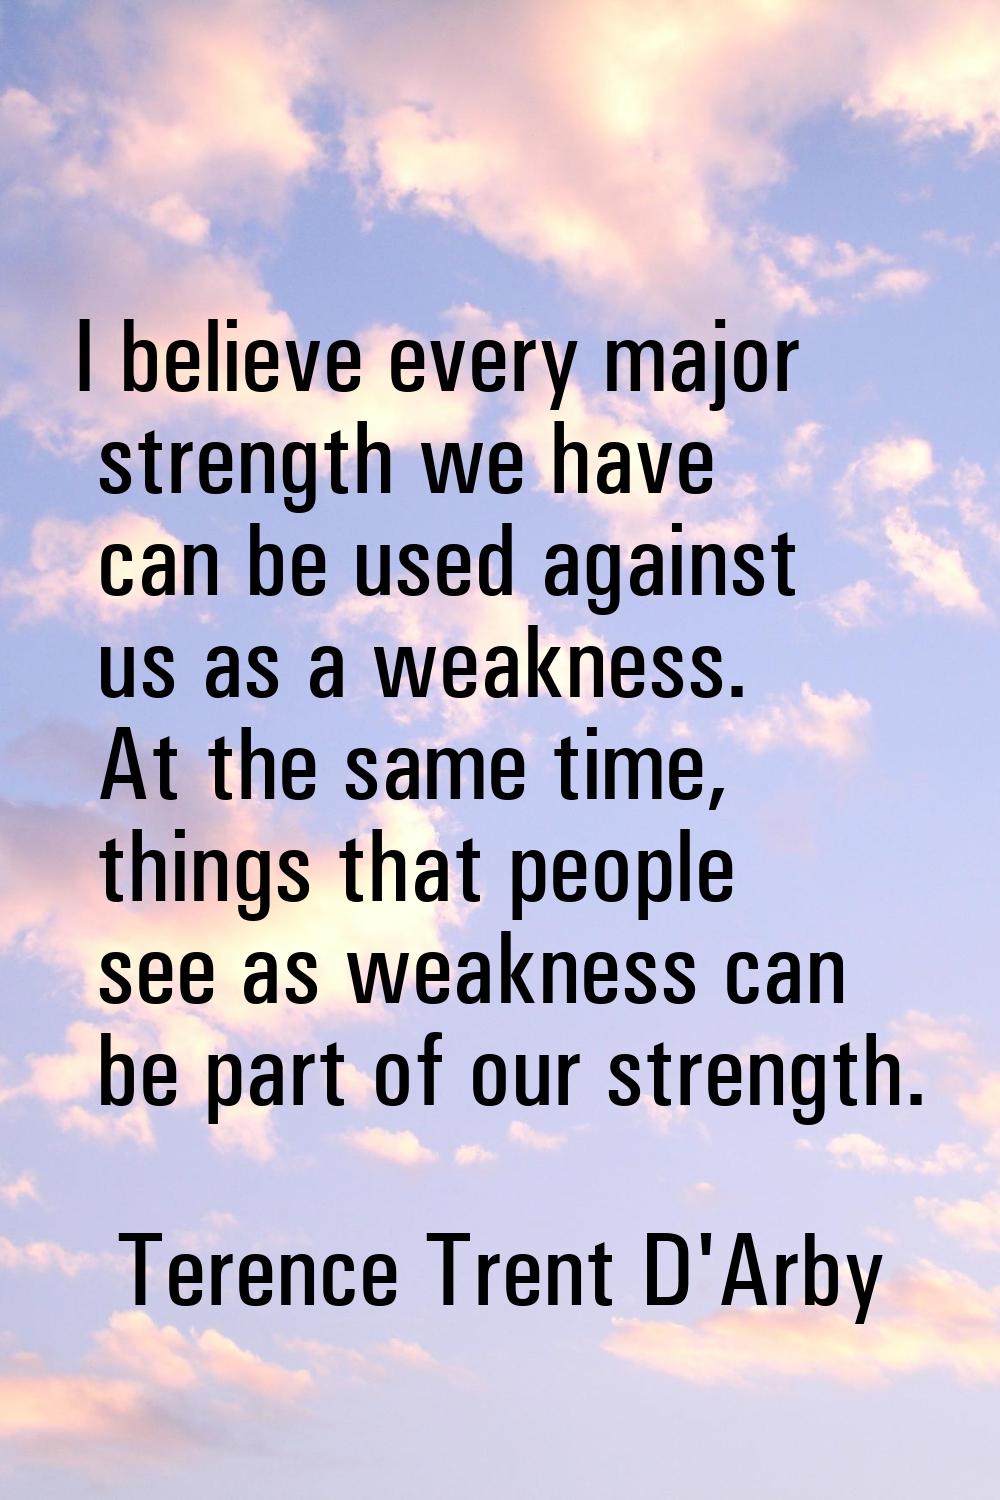 I believe every major strength we have can be used against us as a weakness. At the same time, thin